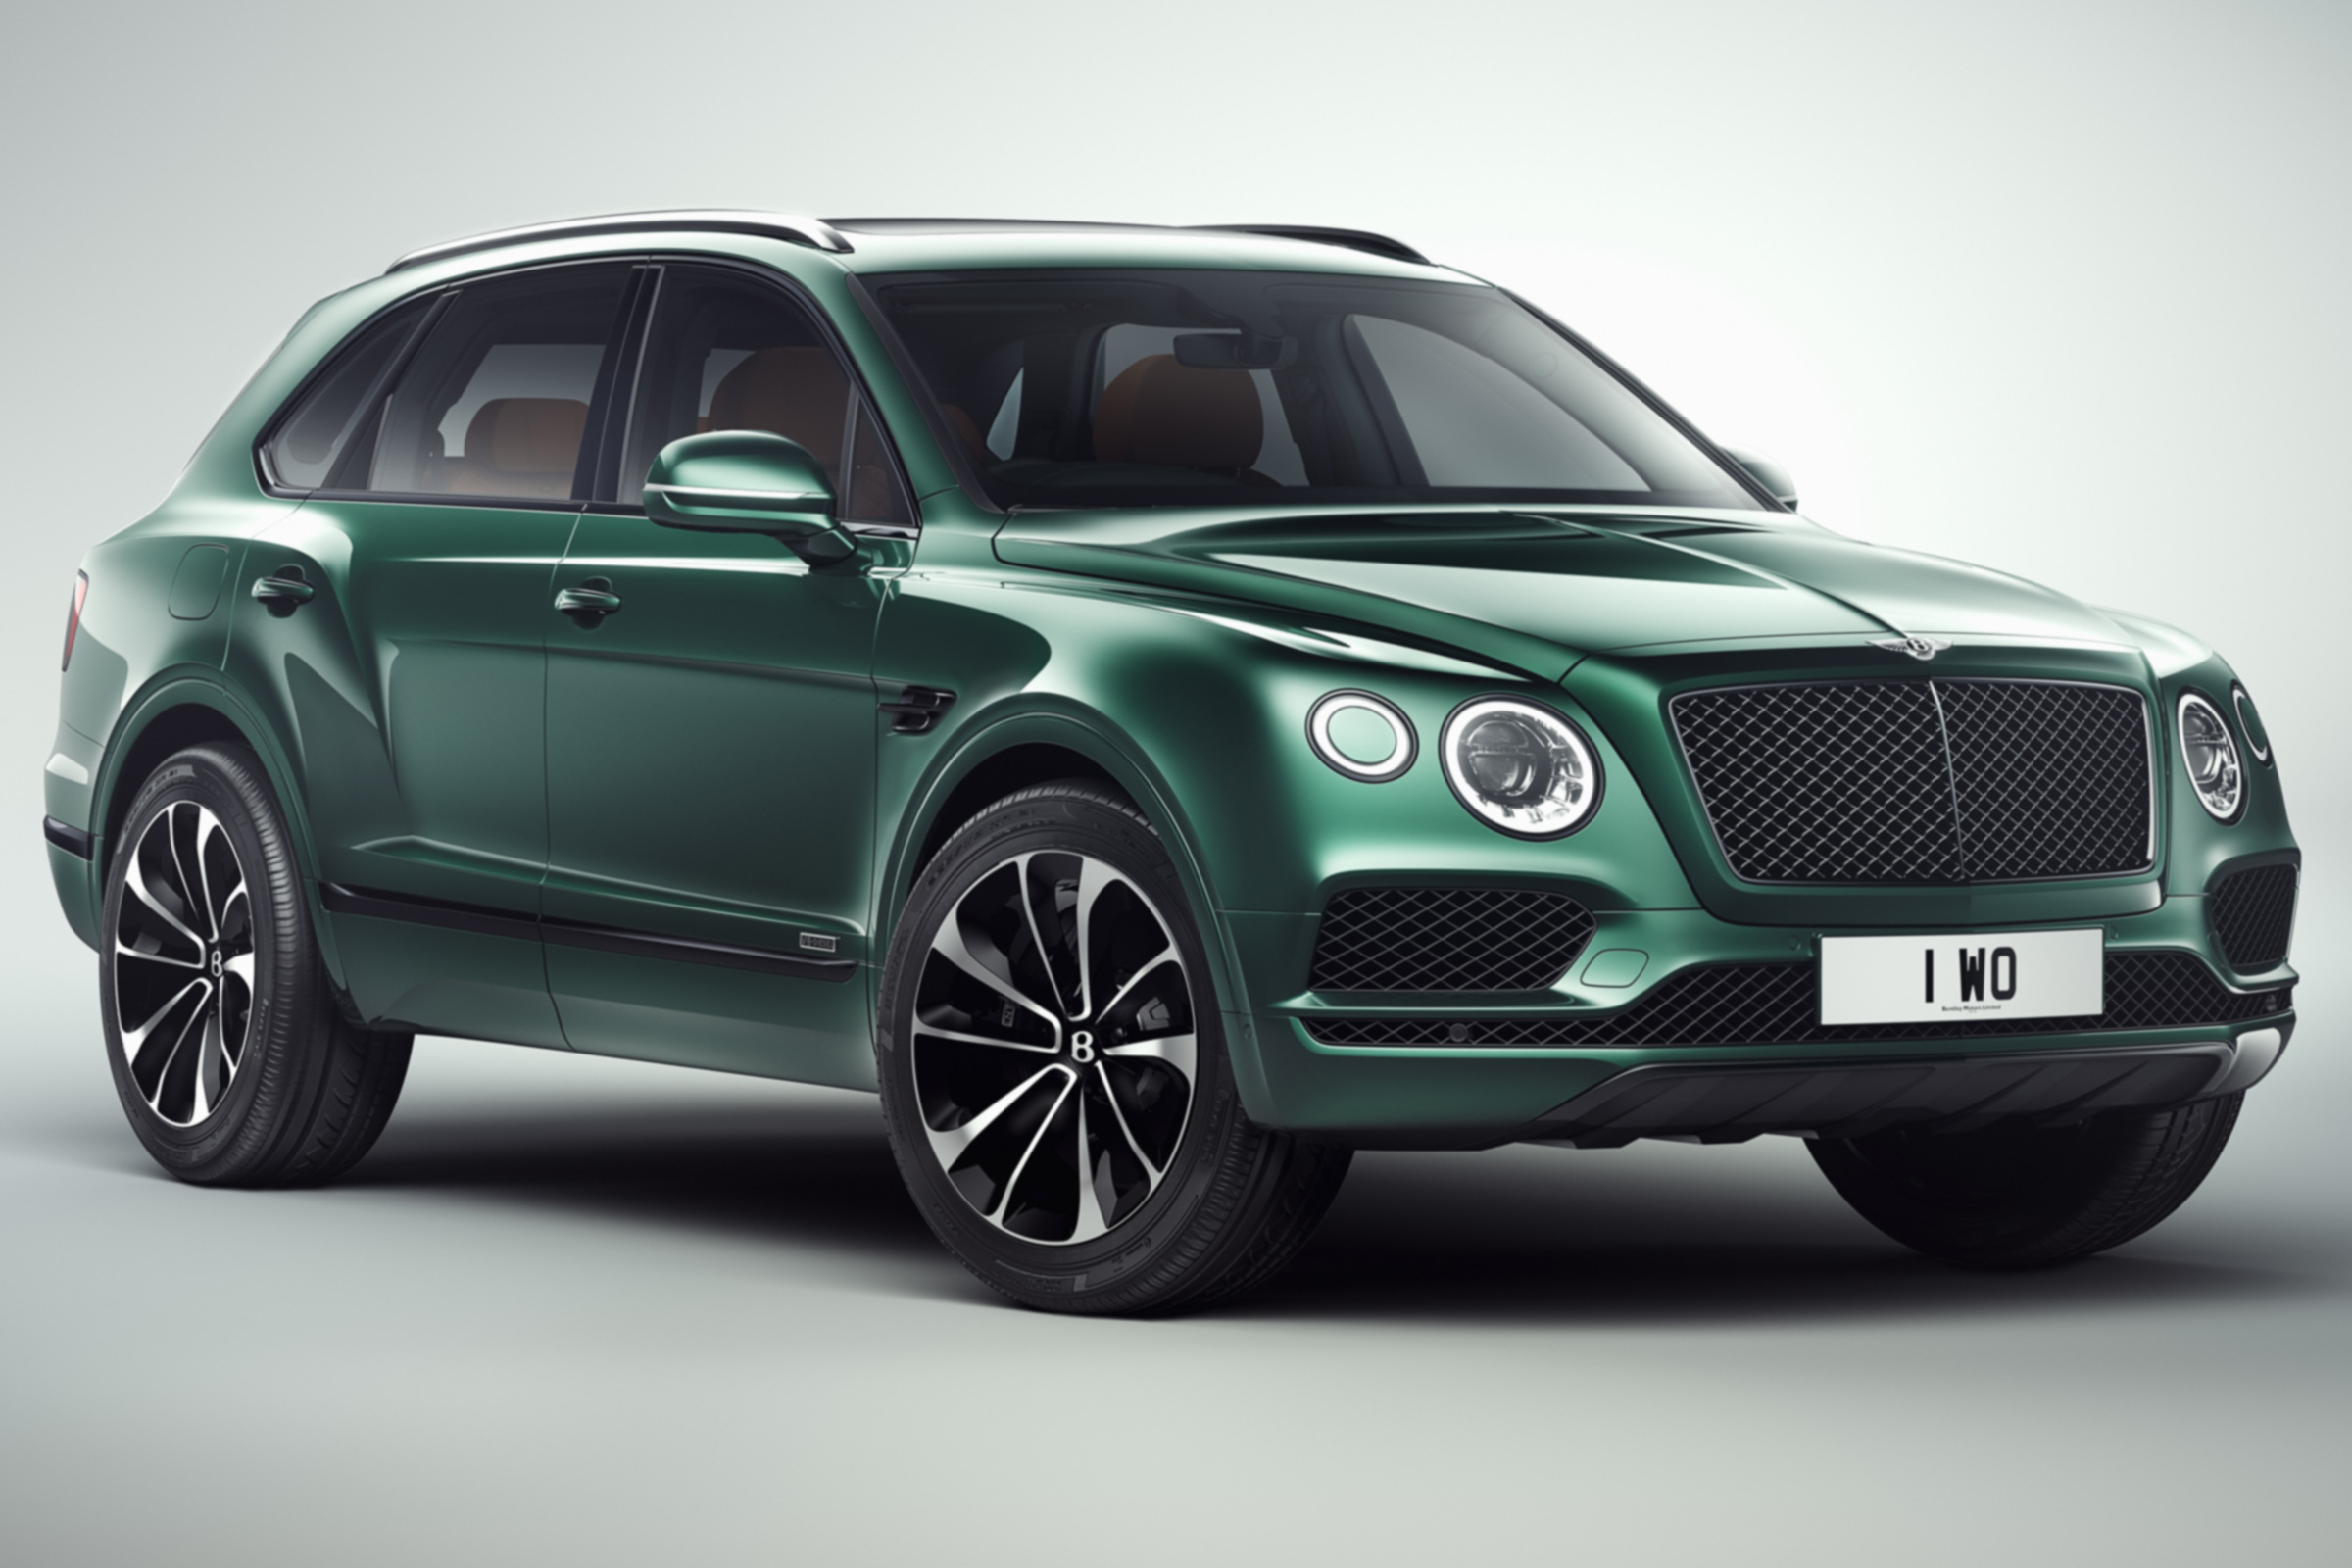 bentley bentayga goes all horsey with one off special edition by mulliner auto express bentley bentayga goes all horsey with